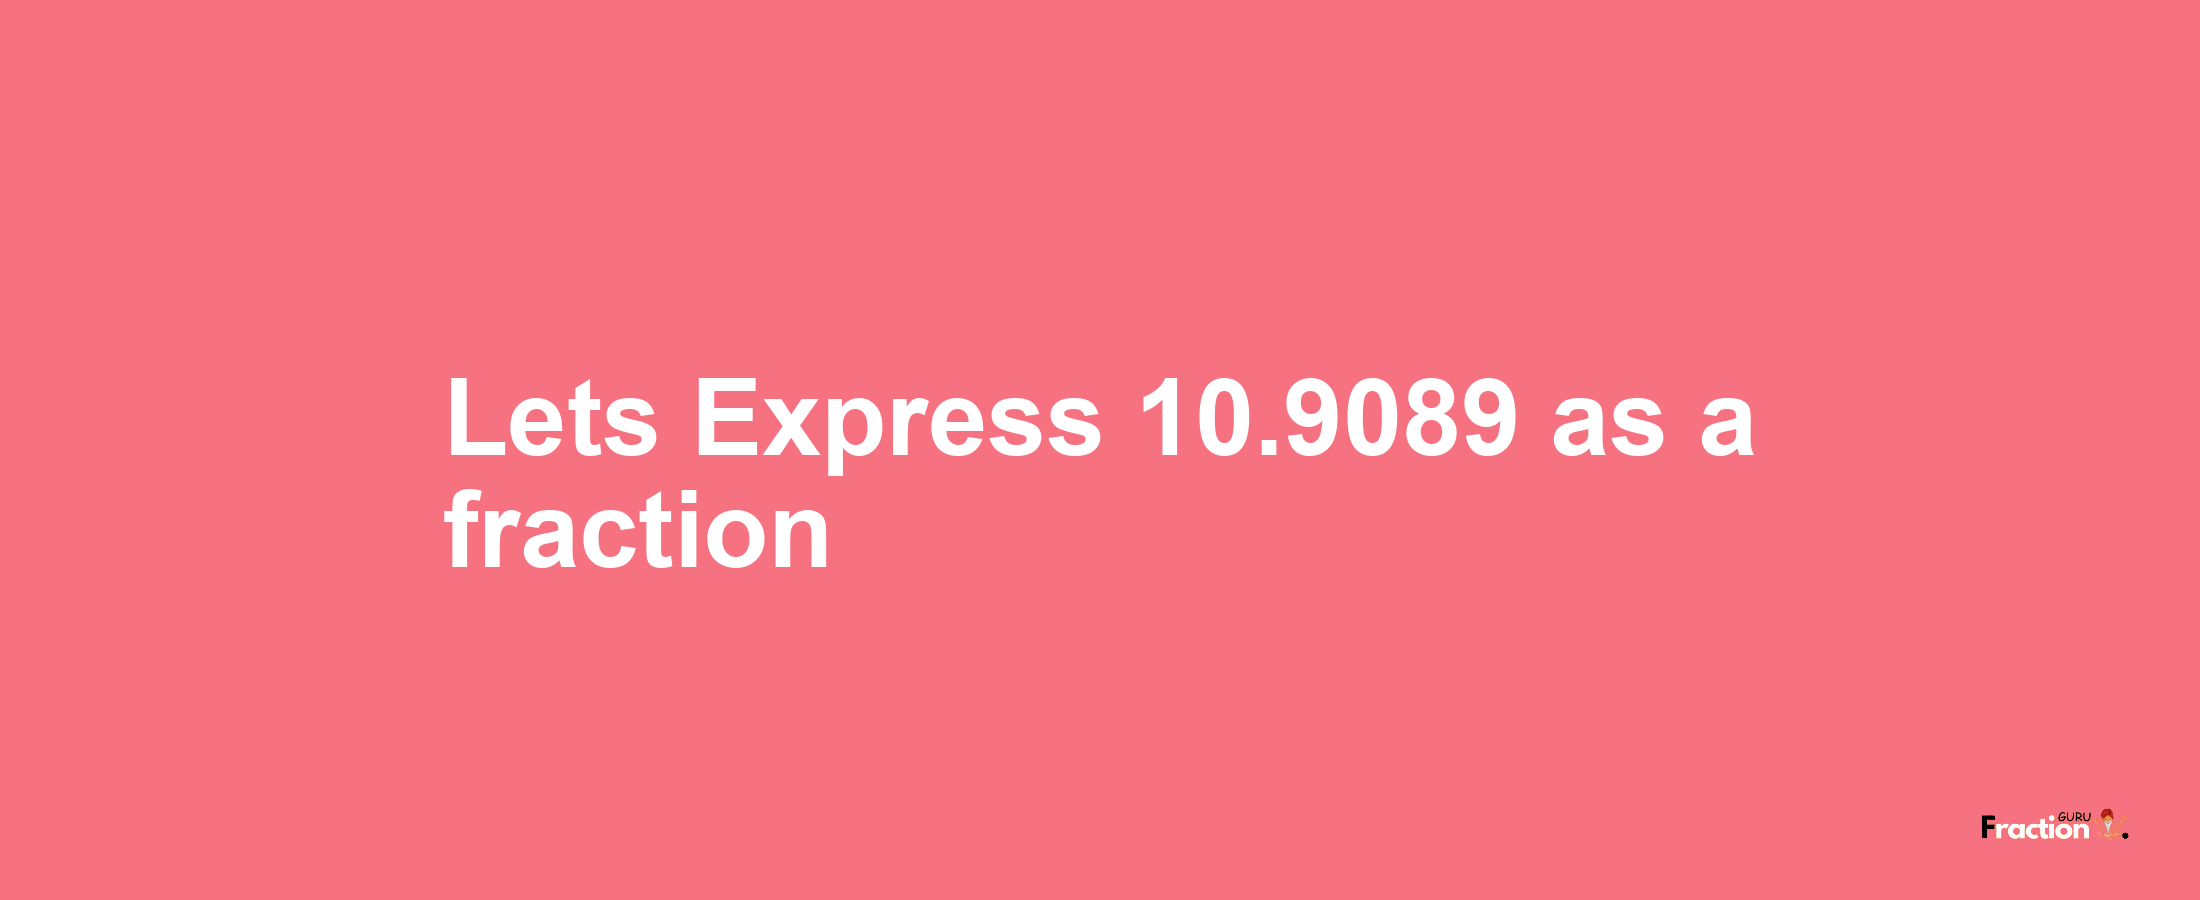 Lets Express 10.9089 as afraction